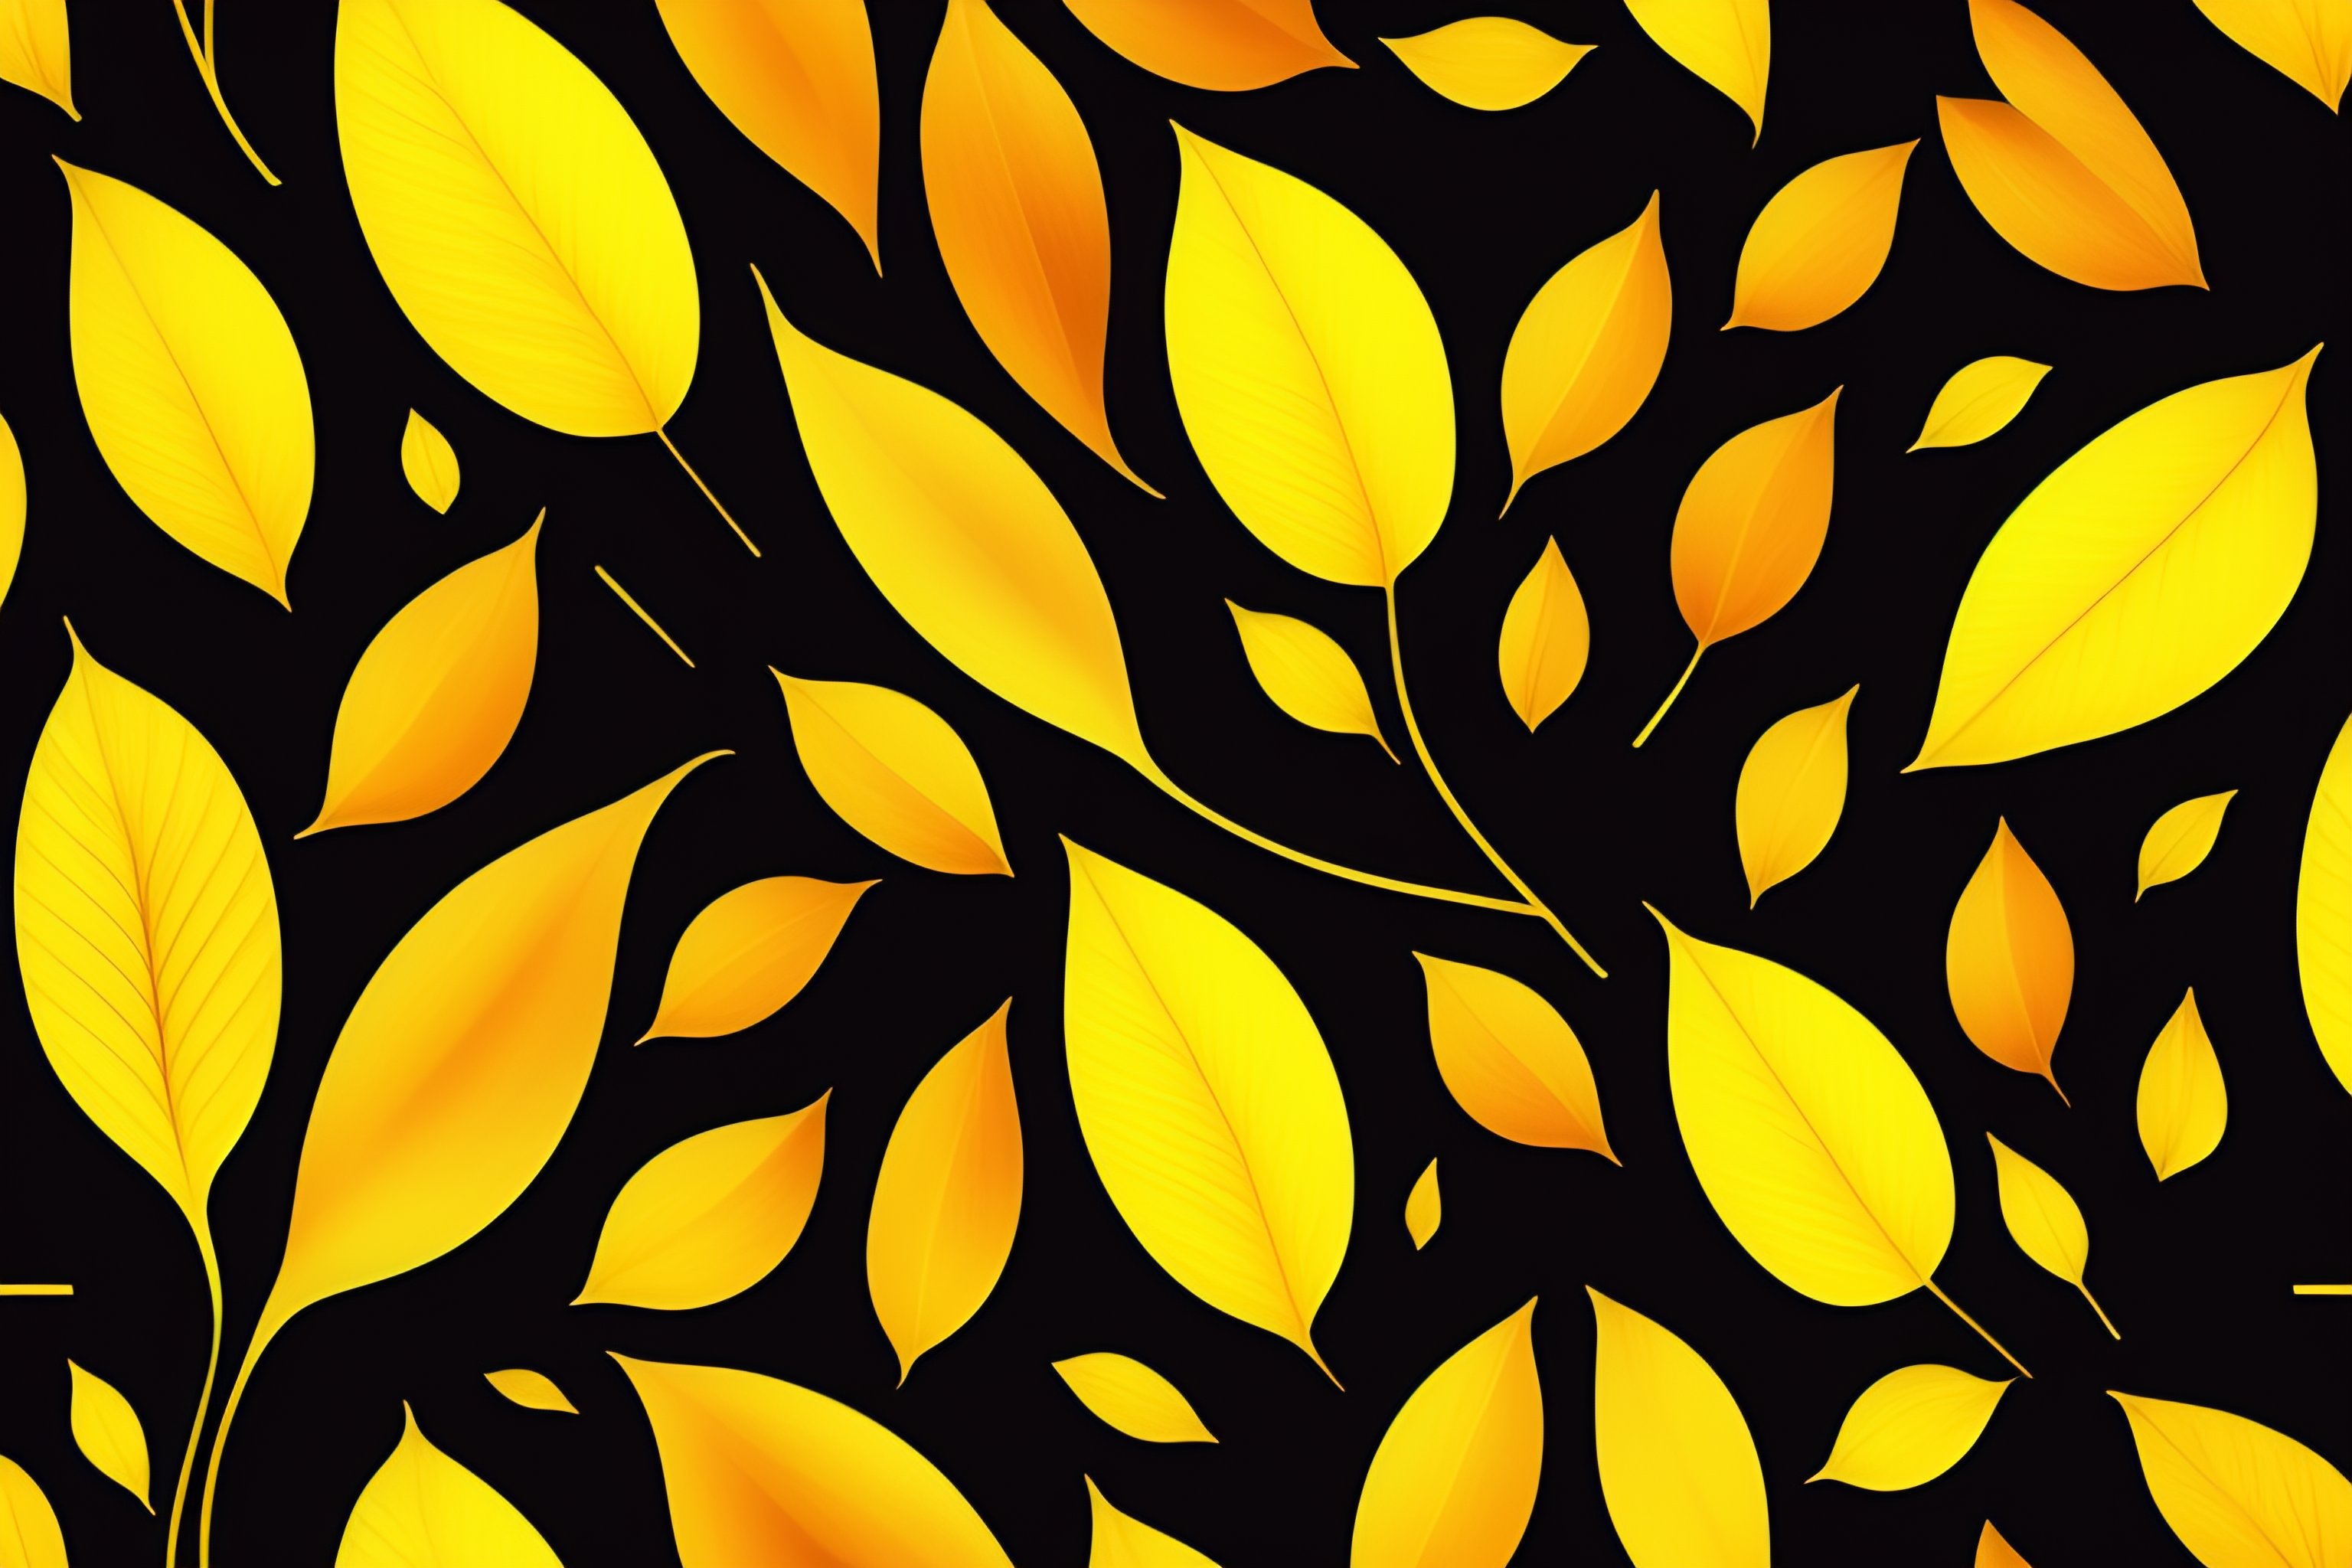 Lexica - A pattern of metallic gold leaves fades into the background